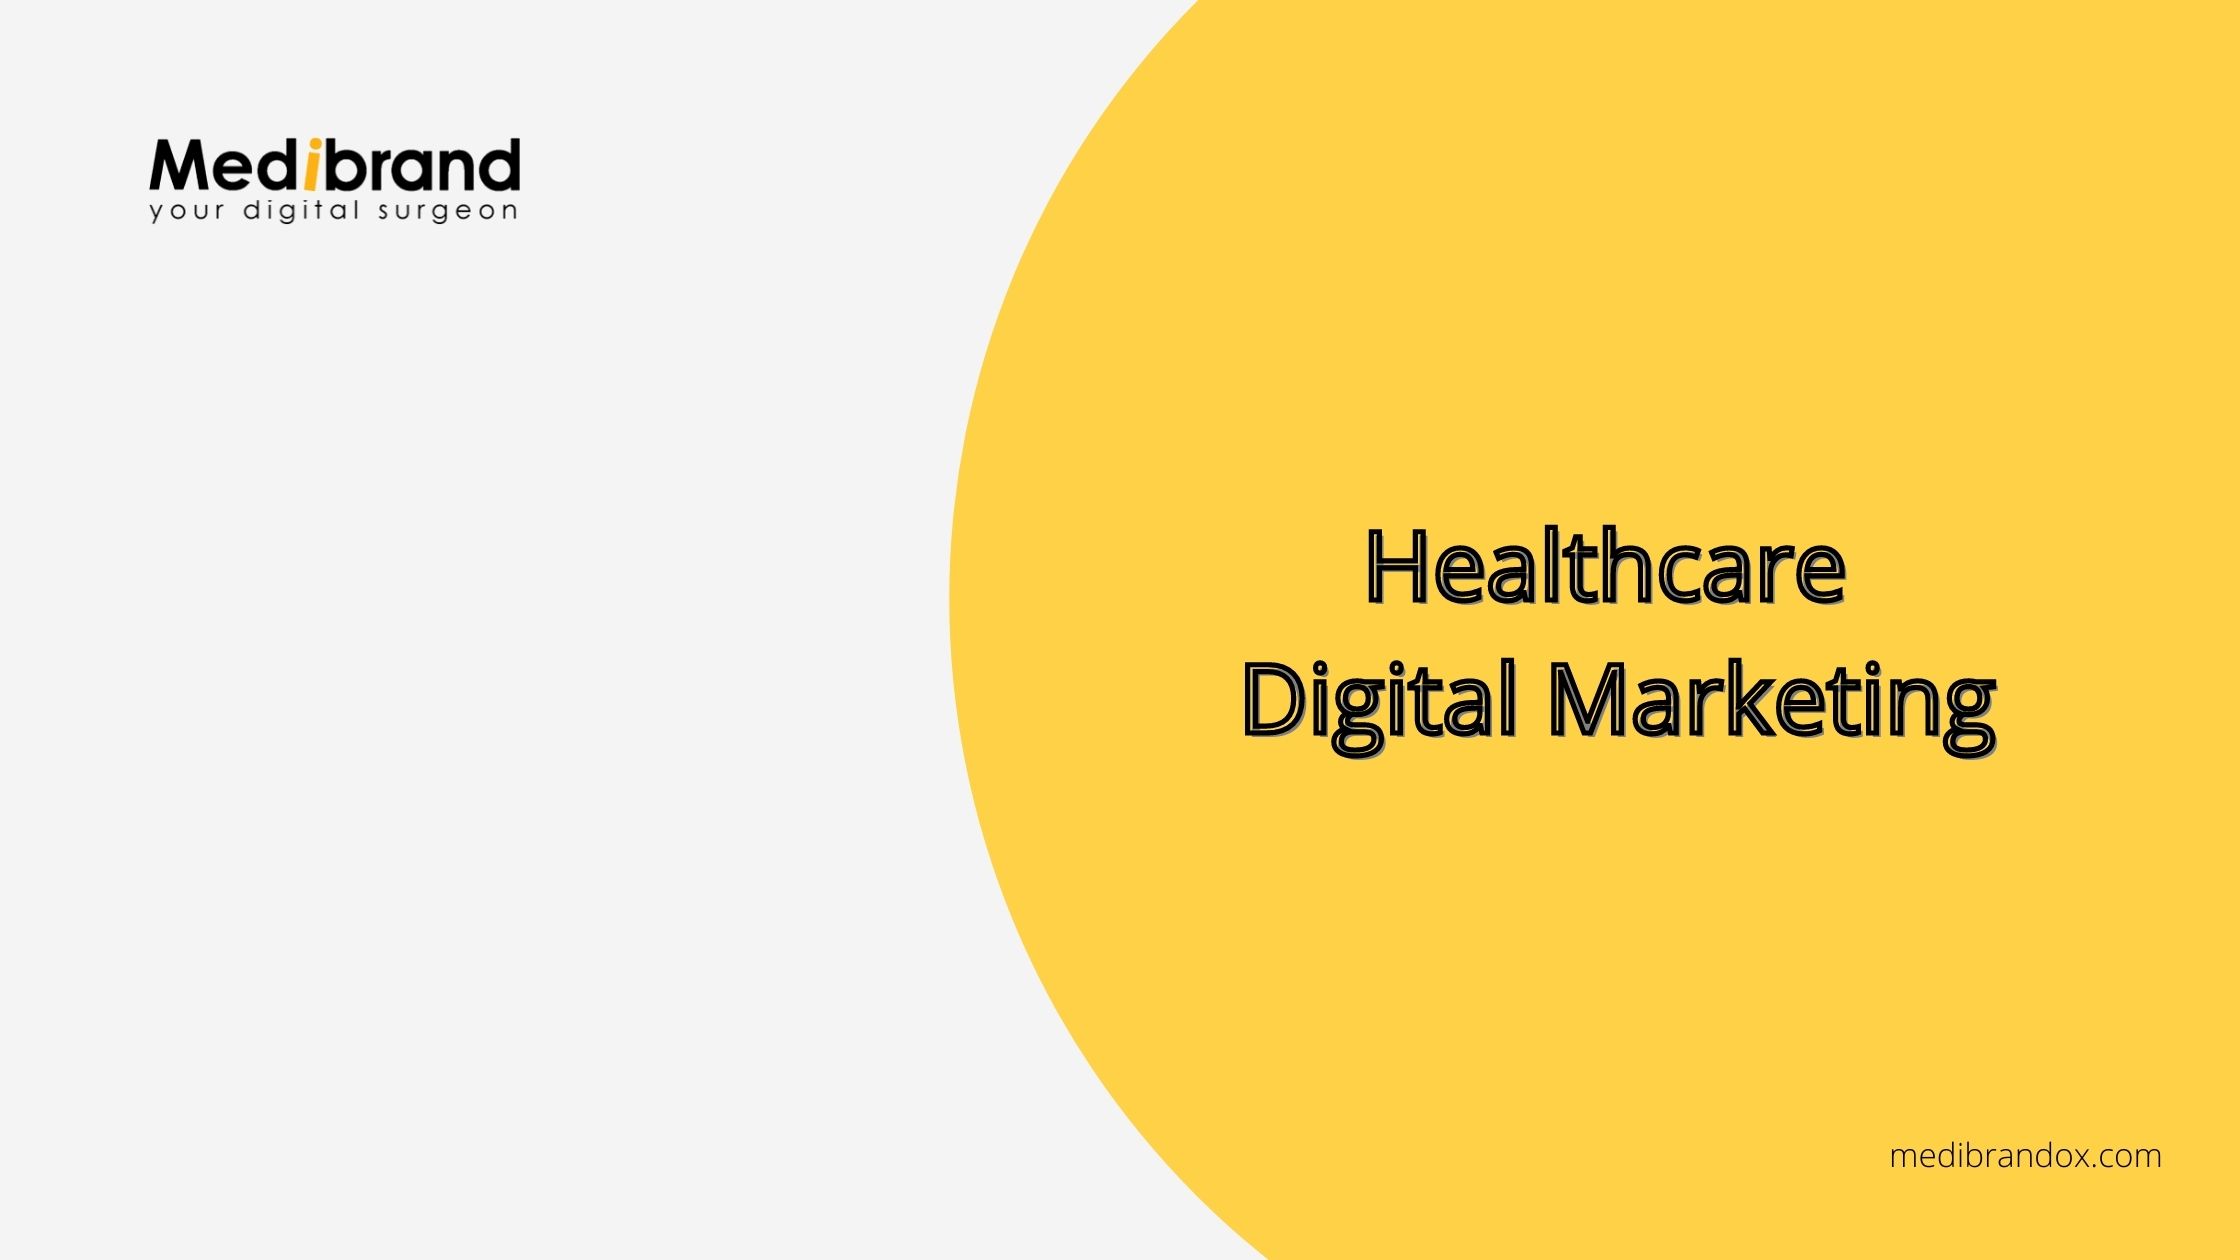 Article about Healthcare Digital Marketing Company Helps To Reach New Patients